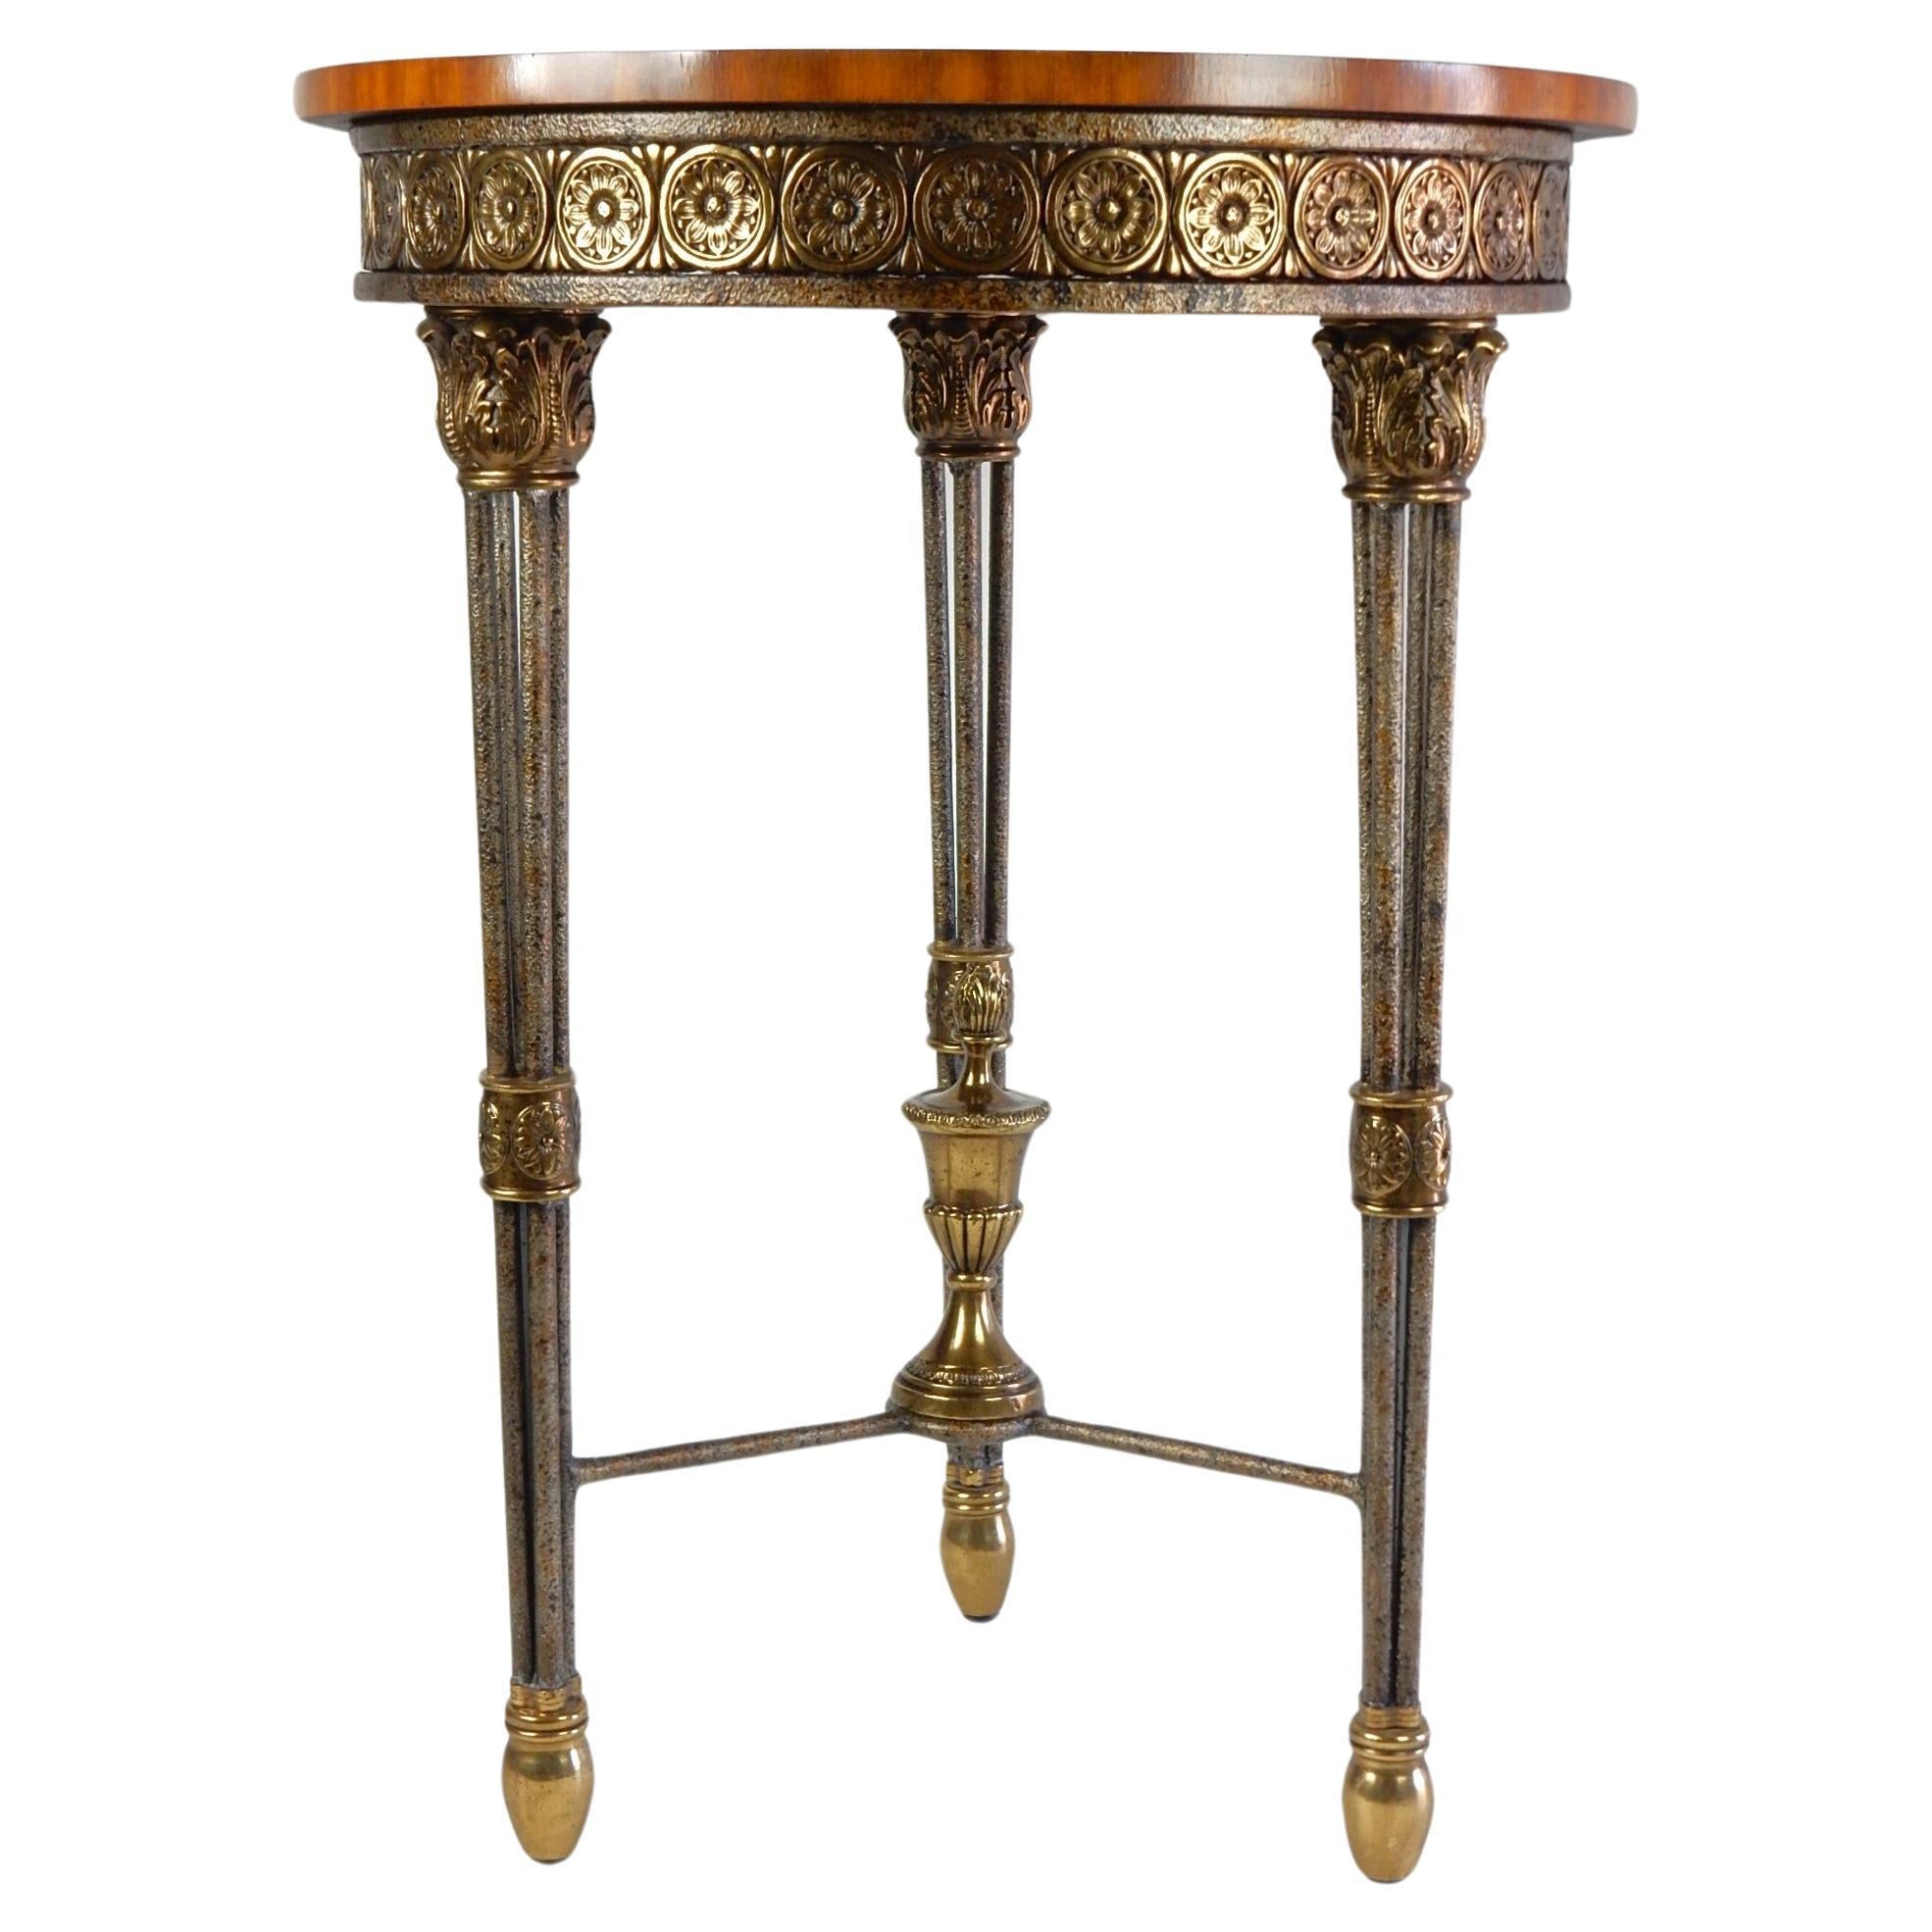 Stunning geometric floral flame Mahogany inlayed top Gueridon table
by Maitland Smith. Stands 32-1/2in tall X 24in wide.
Surround brass floral reliefs, iron legs and large egg shape brass feet.
Huge trophy finial centerpiece.
Labeled 